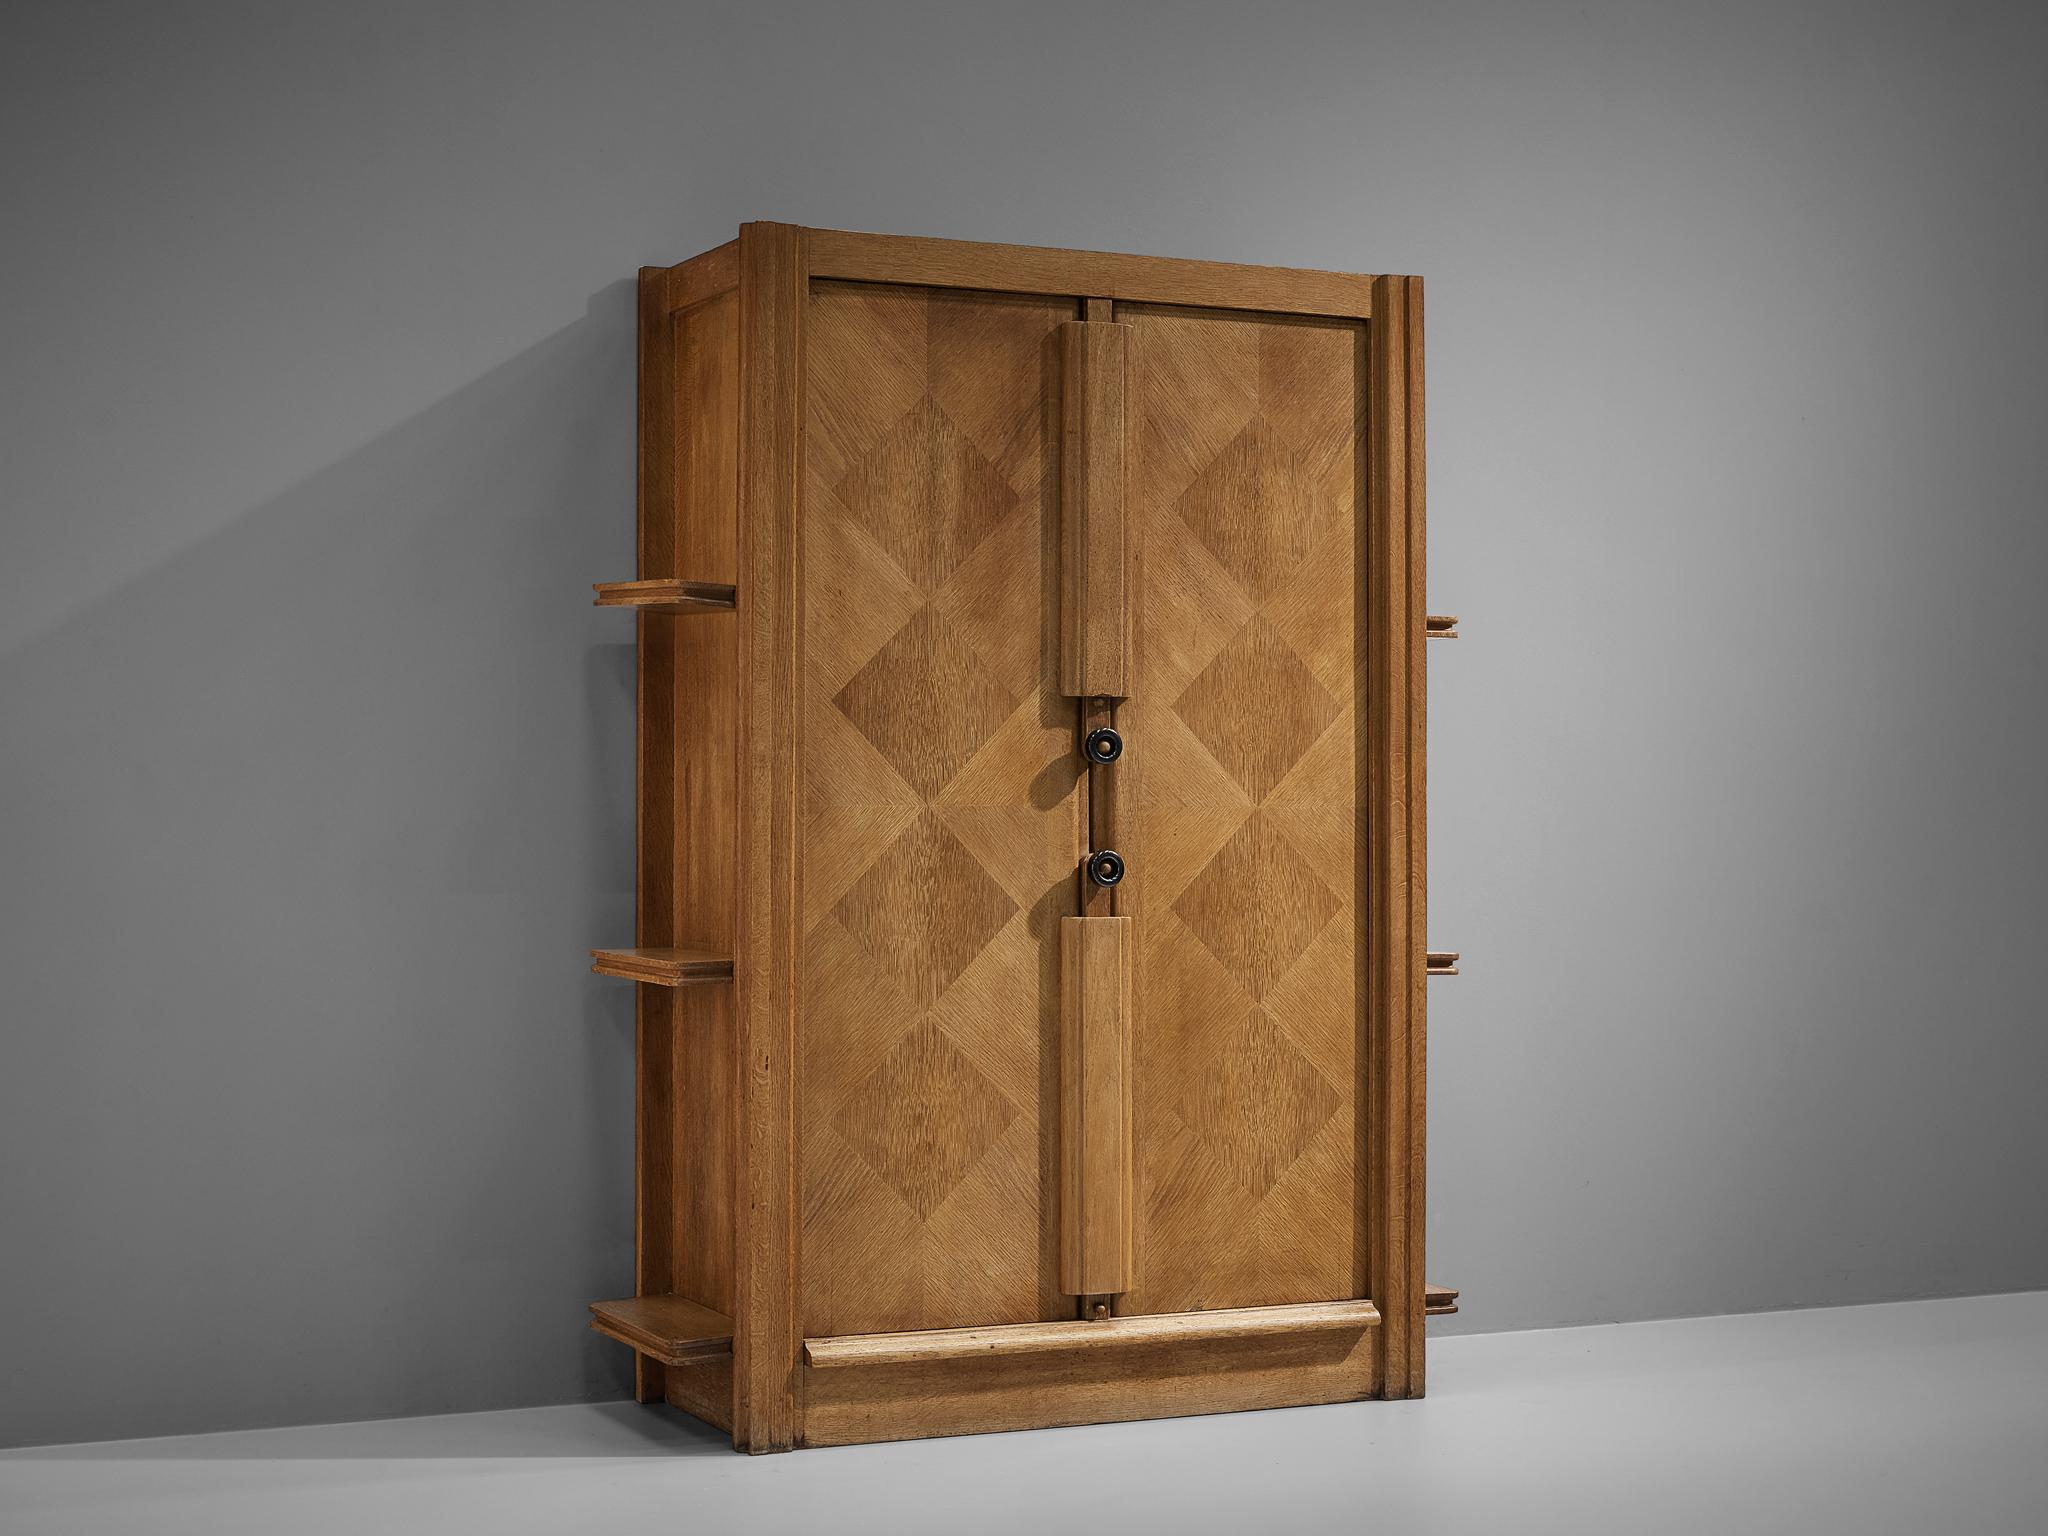 Guillerme et Chambron, cabinet, oak, France, 1960s.

This case piece is designed by Guillerme and Chambron and features geometric oak inlays, which is characteristic for the French designer duo. The center is accentuated with vertical slats as